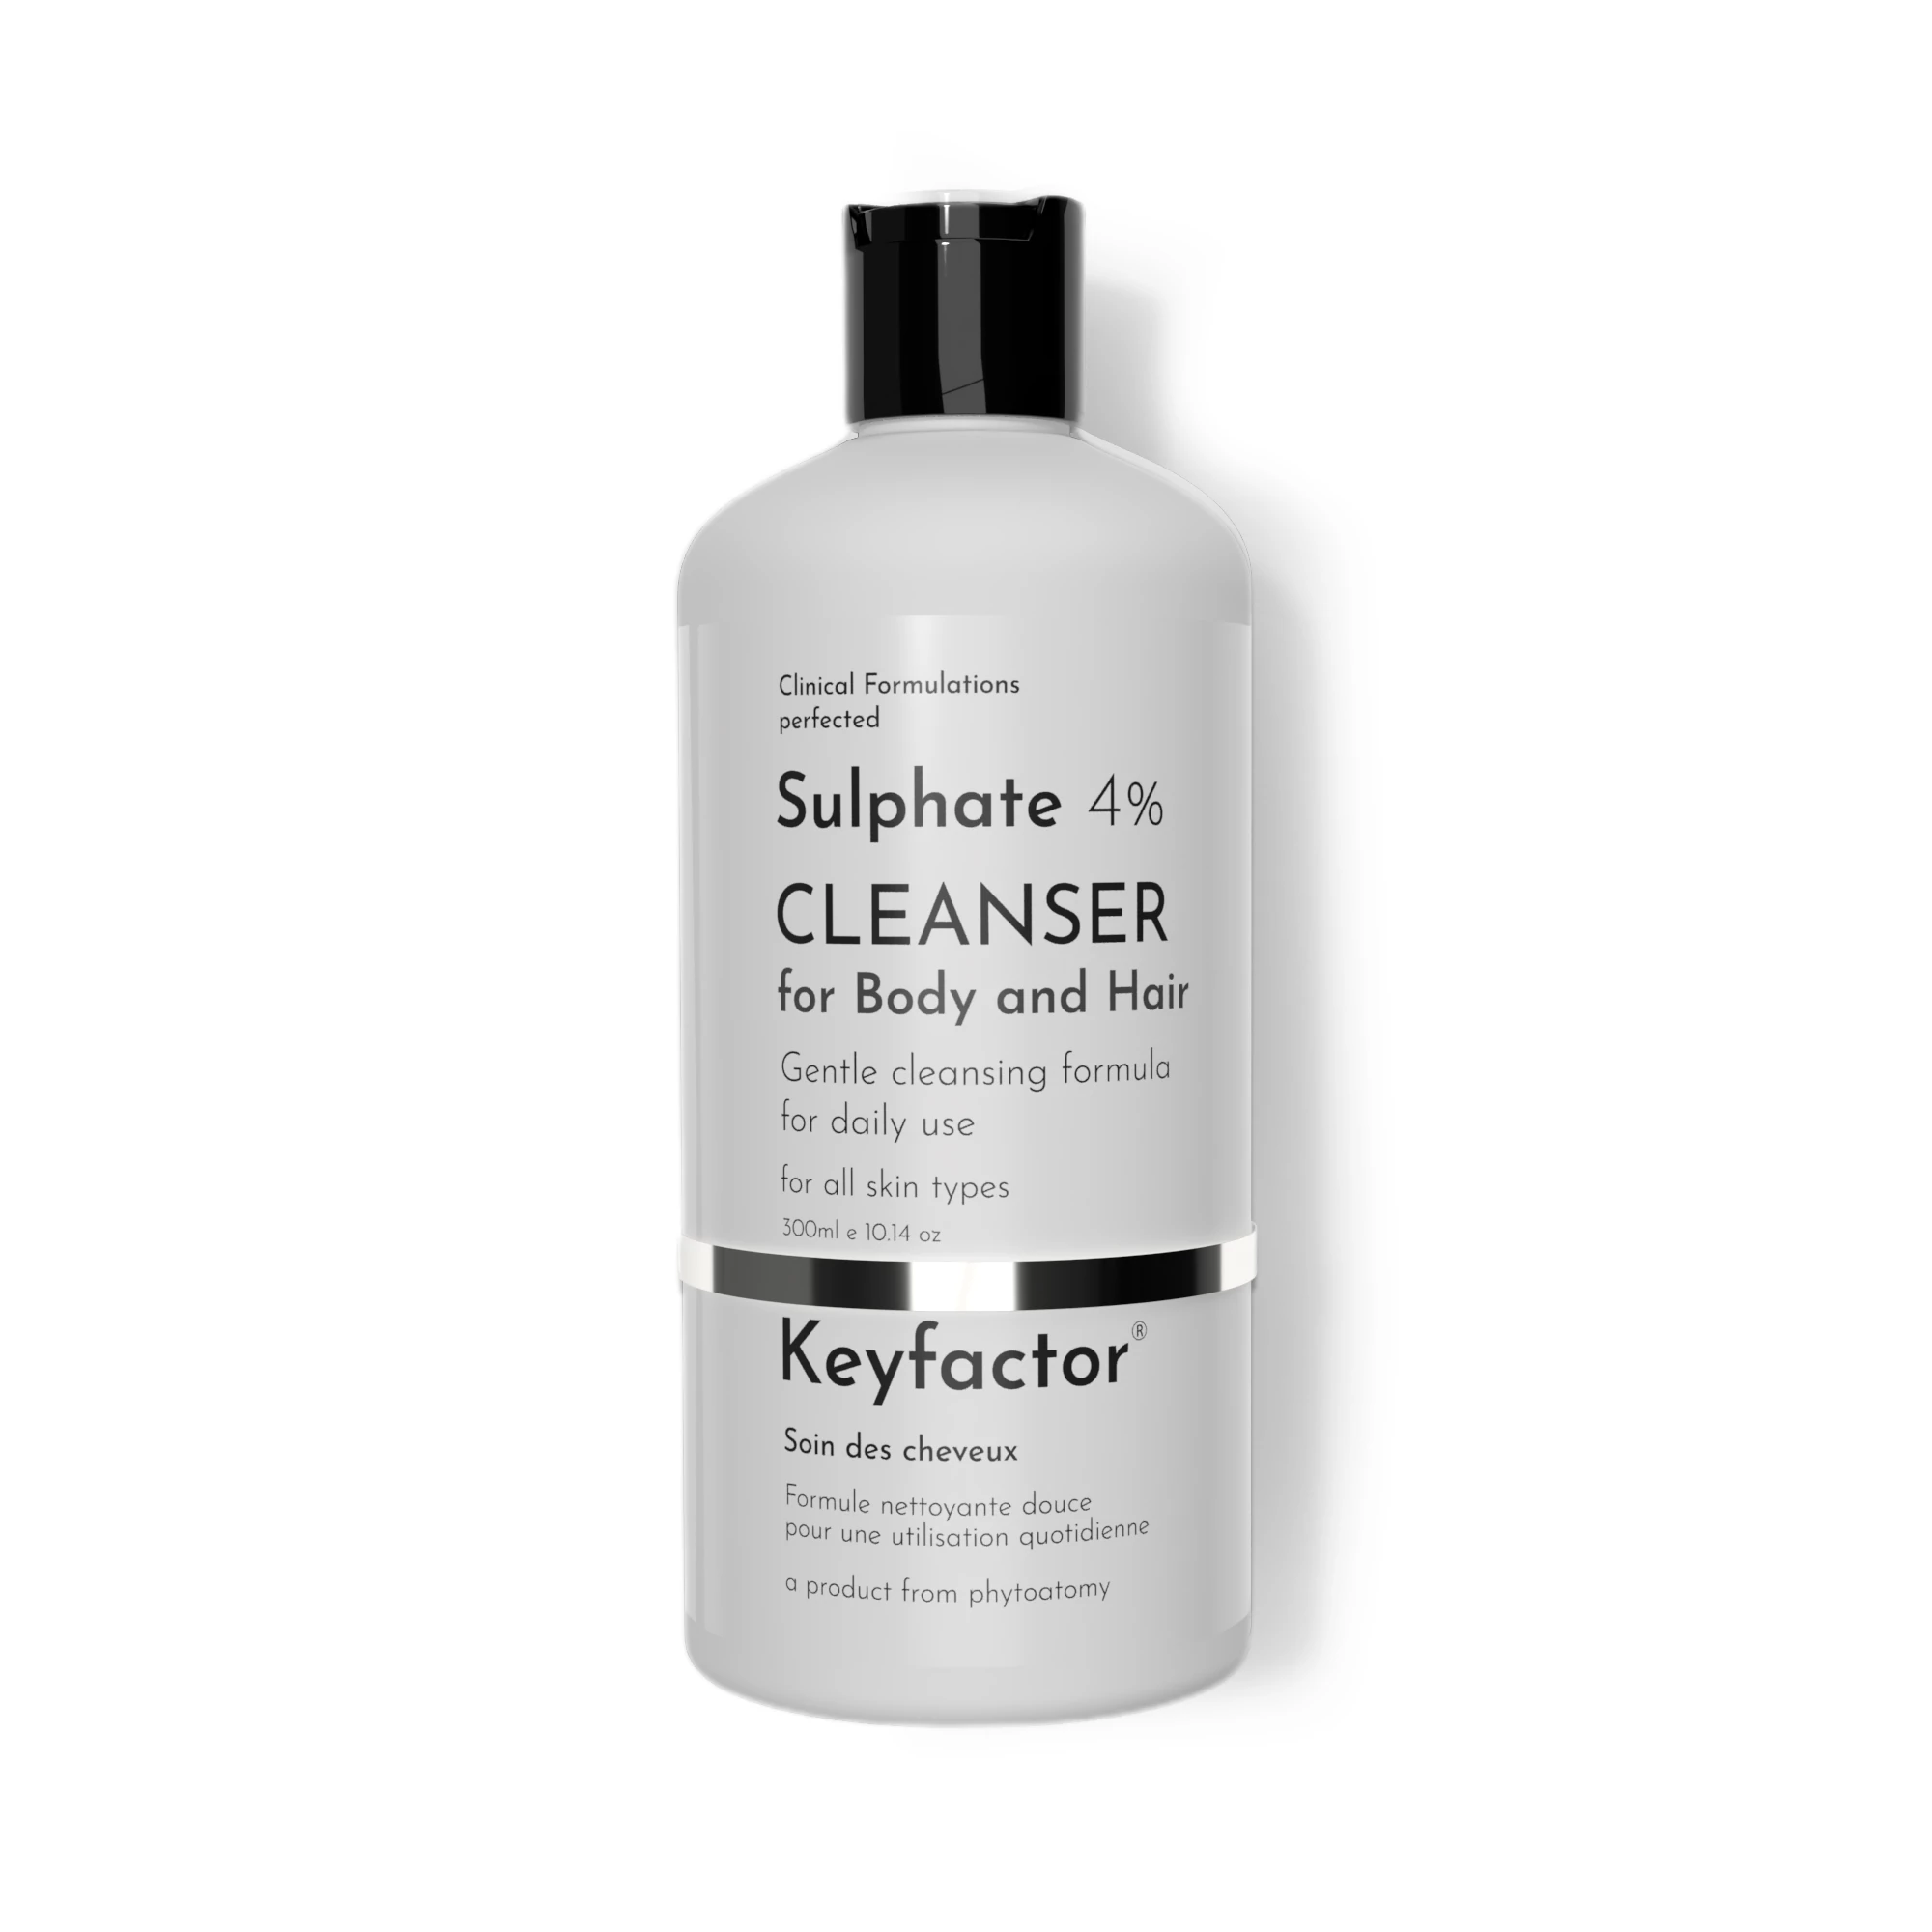 Kf-Sulphate 4% Cleanser For Body and Hair -300Ml.